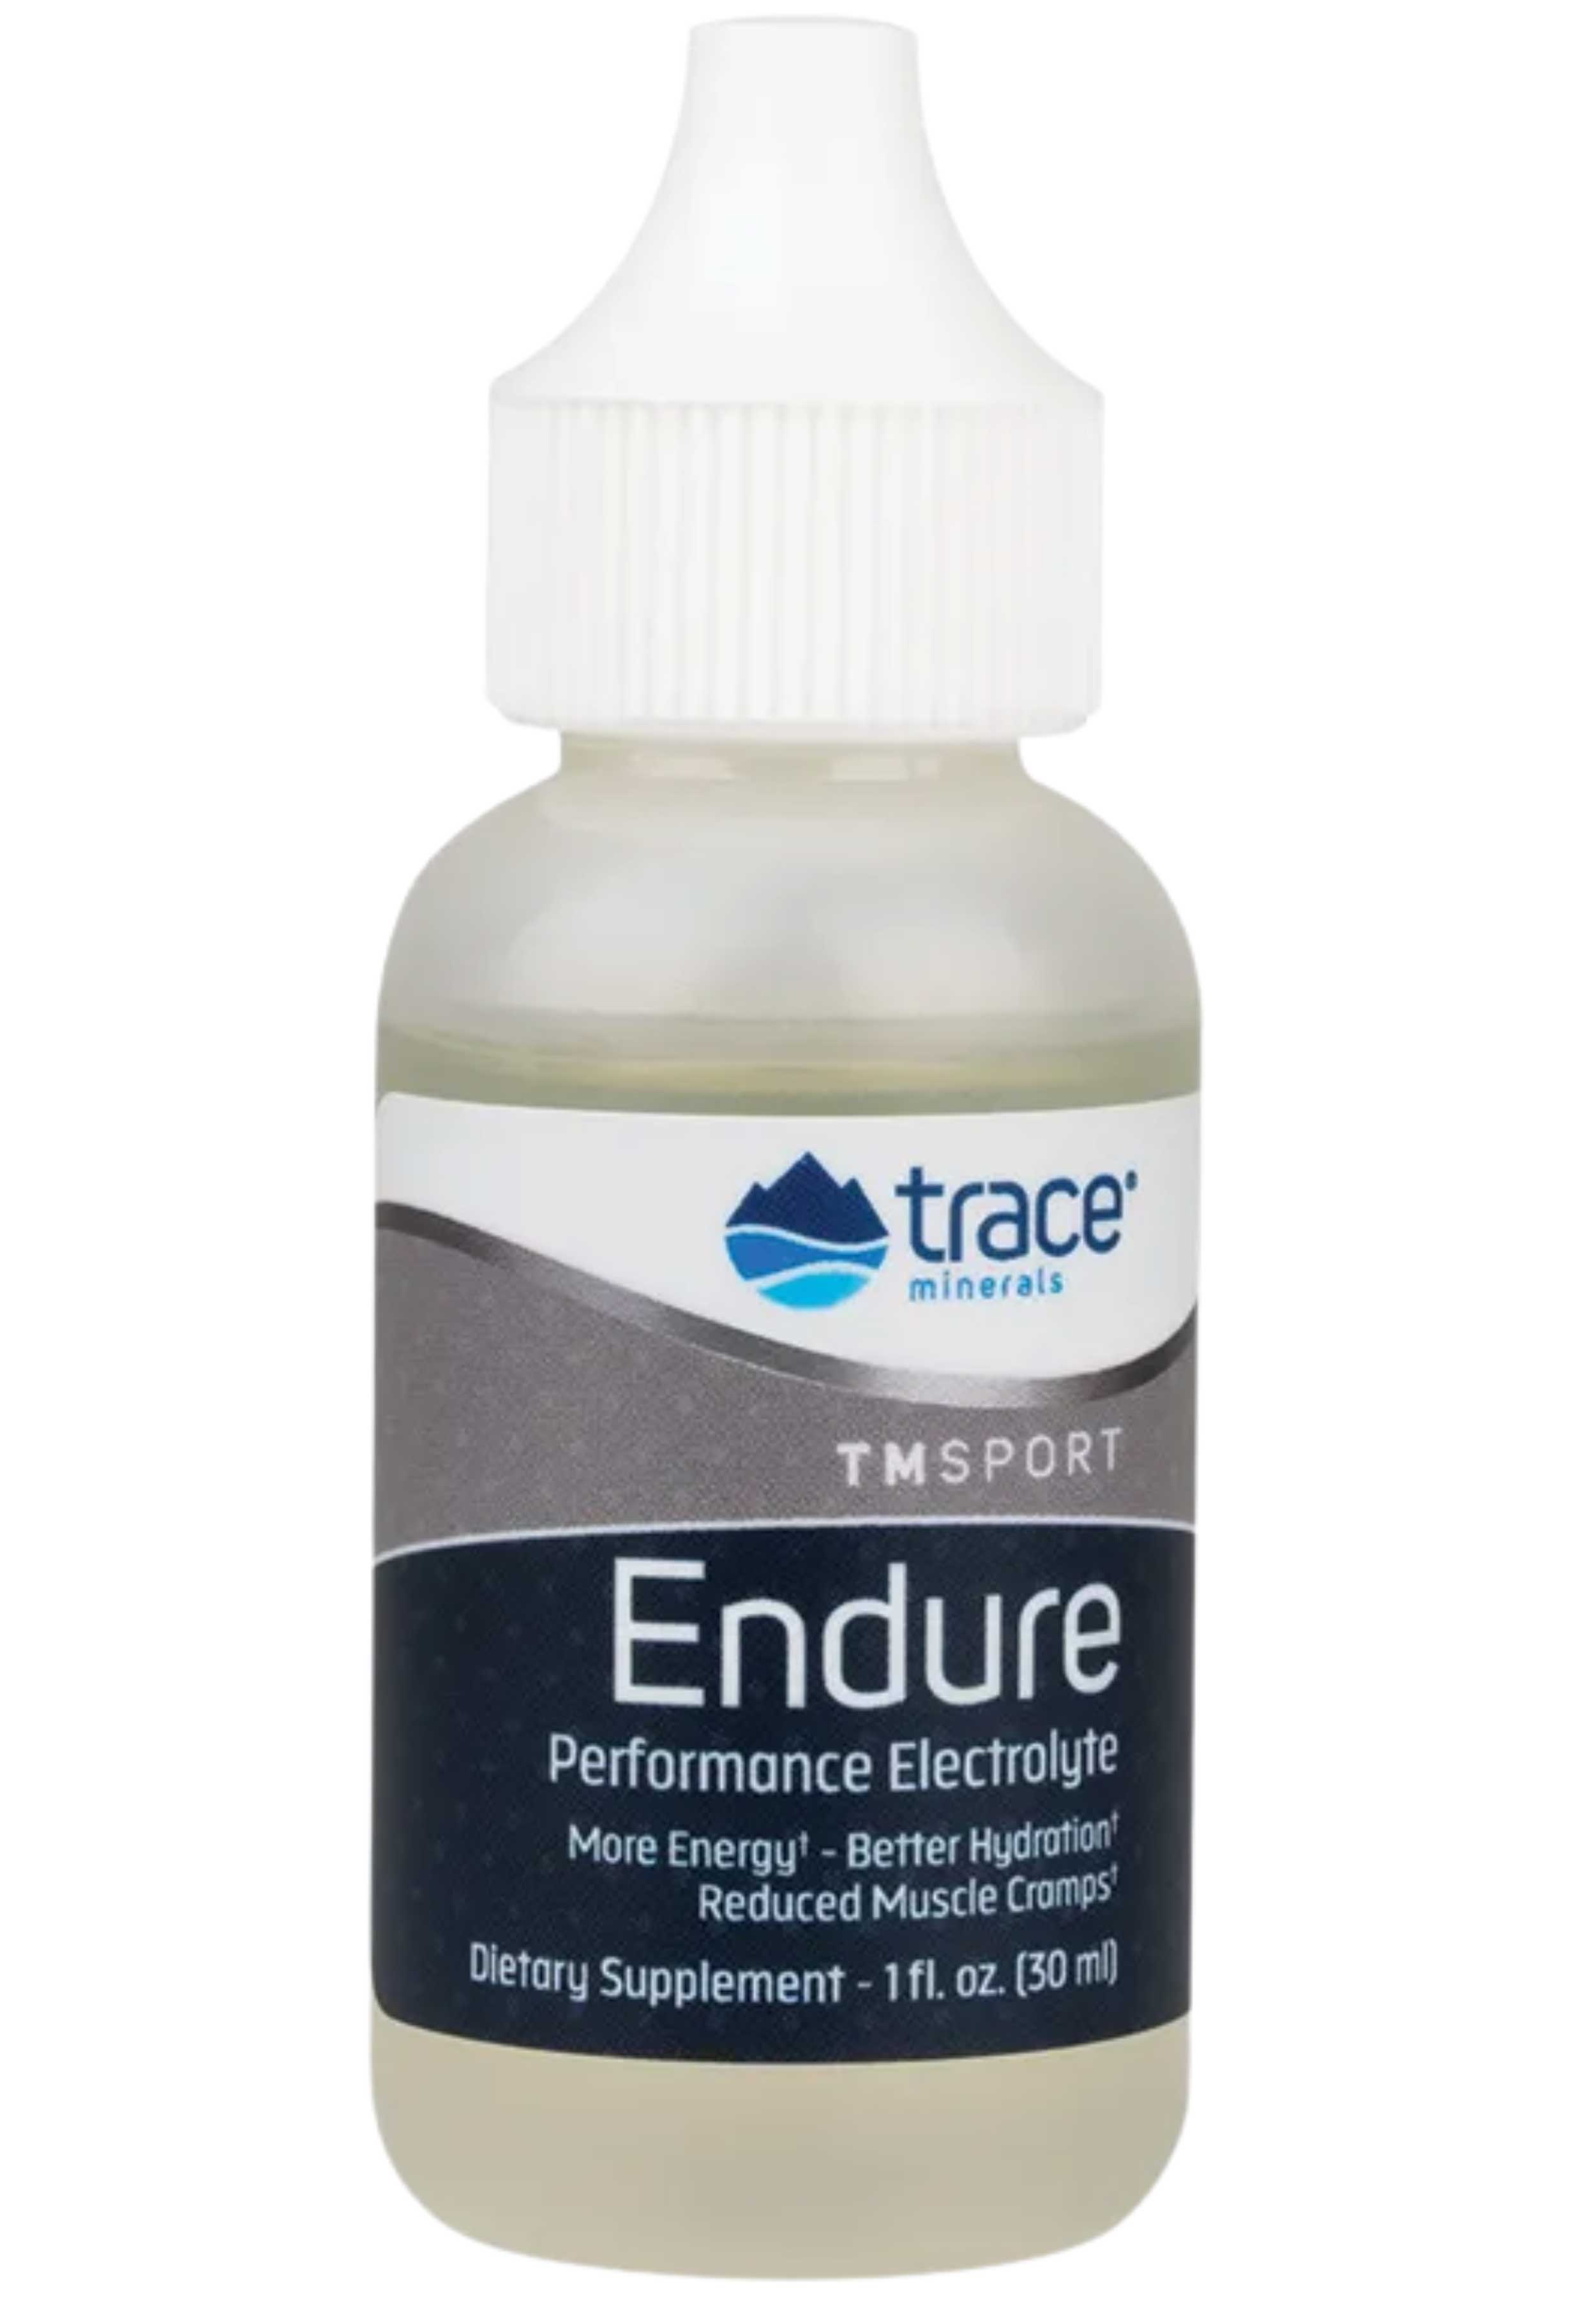 Trace Minerals Research Endure